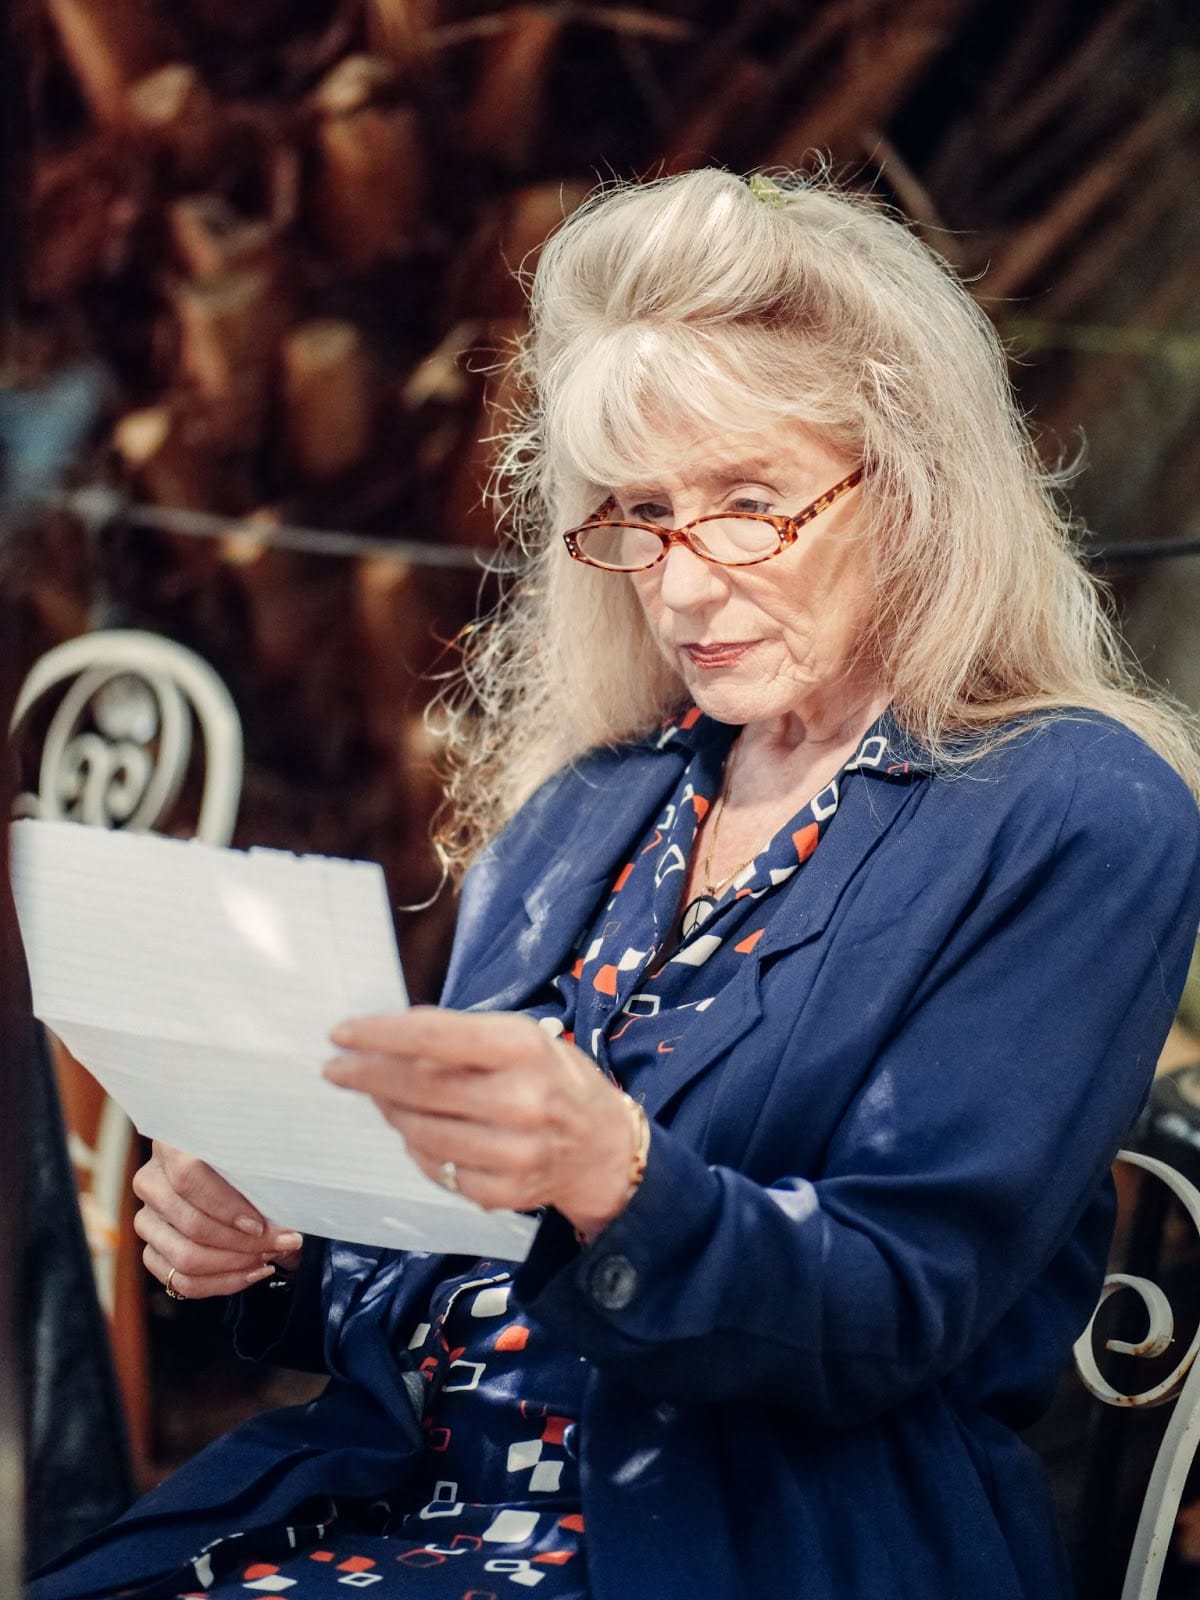 An elderly woman sitting on a bench and reading a paper statement